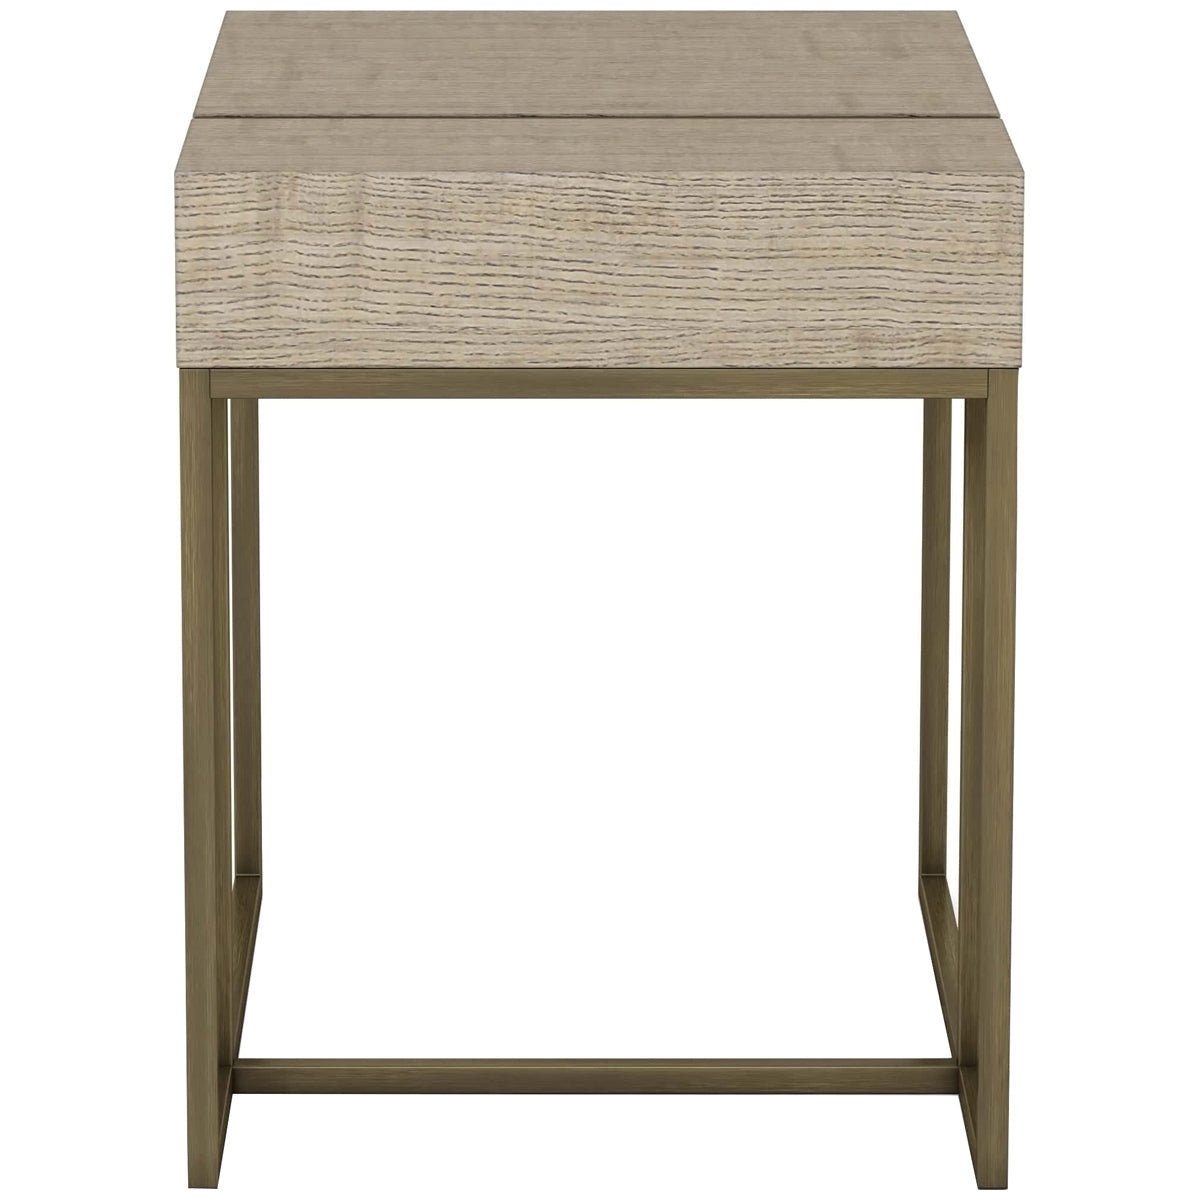 A.R.T. Furniture North Side End Table